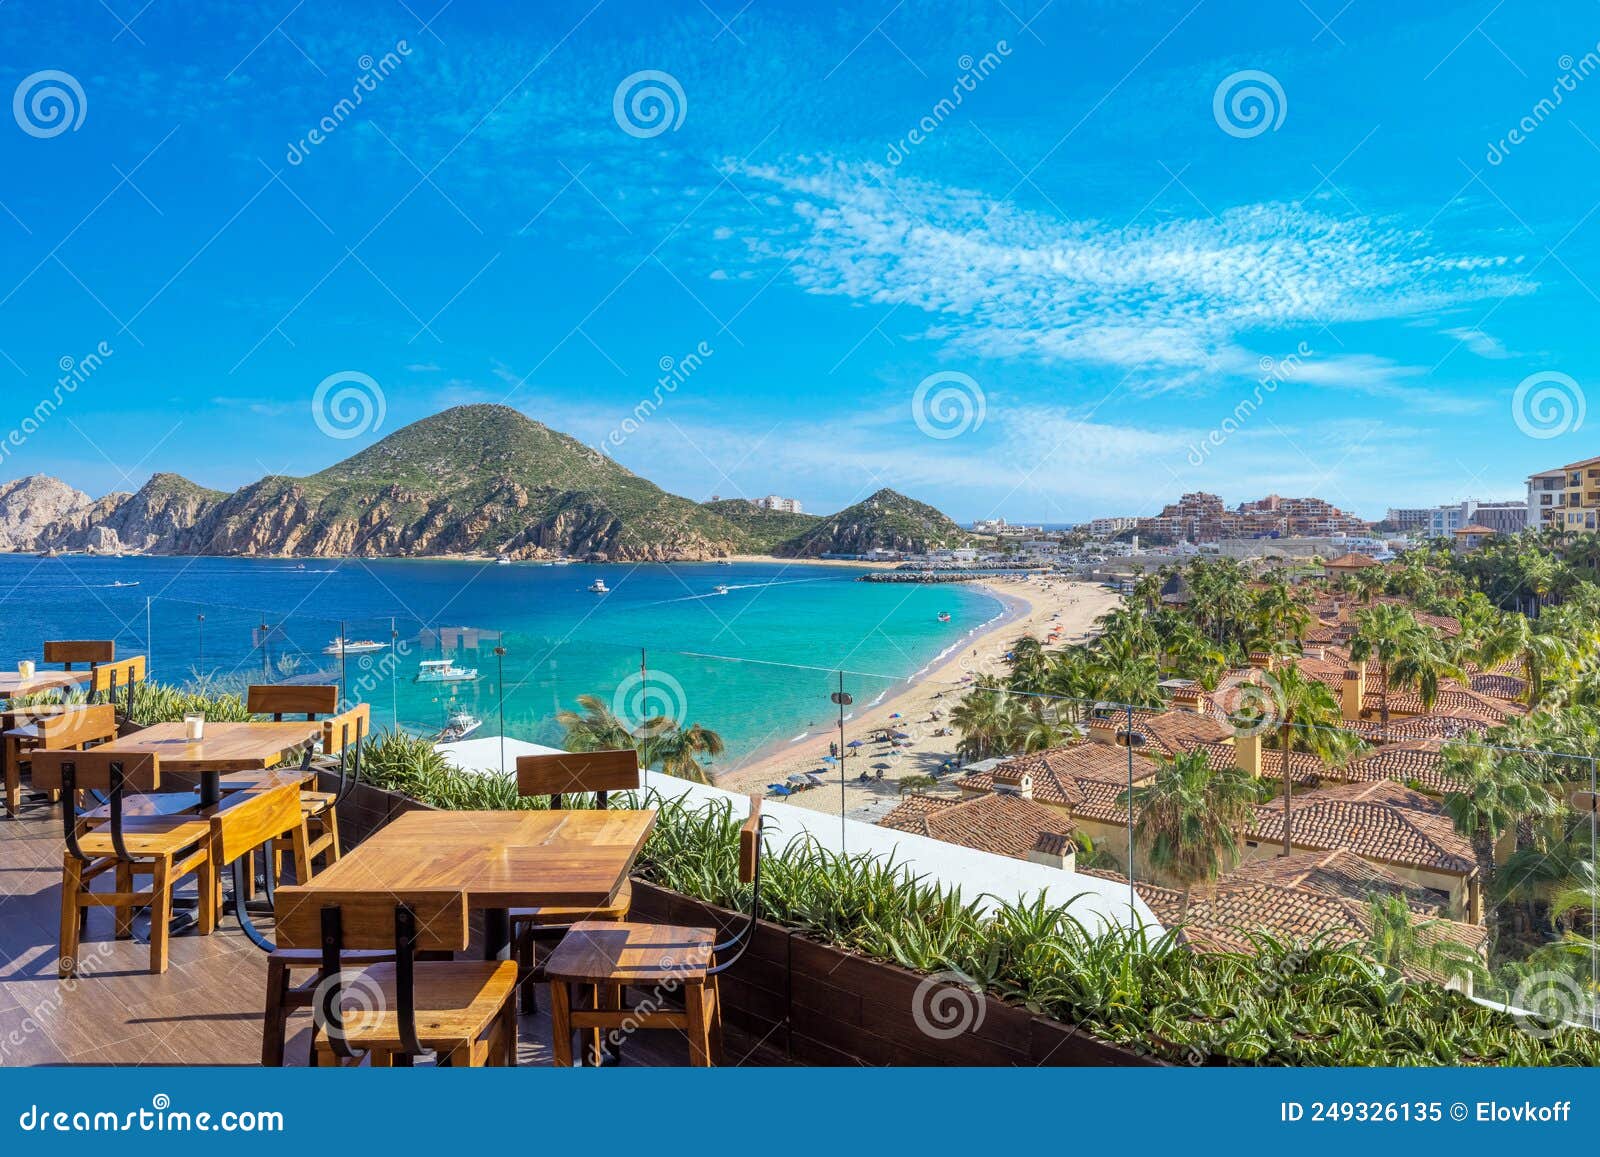 scenic panoramic aerial view of los cabos landmark tourist destination arch of cabo san lucas